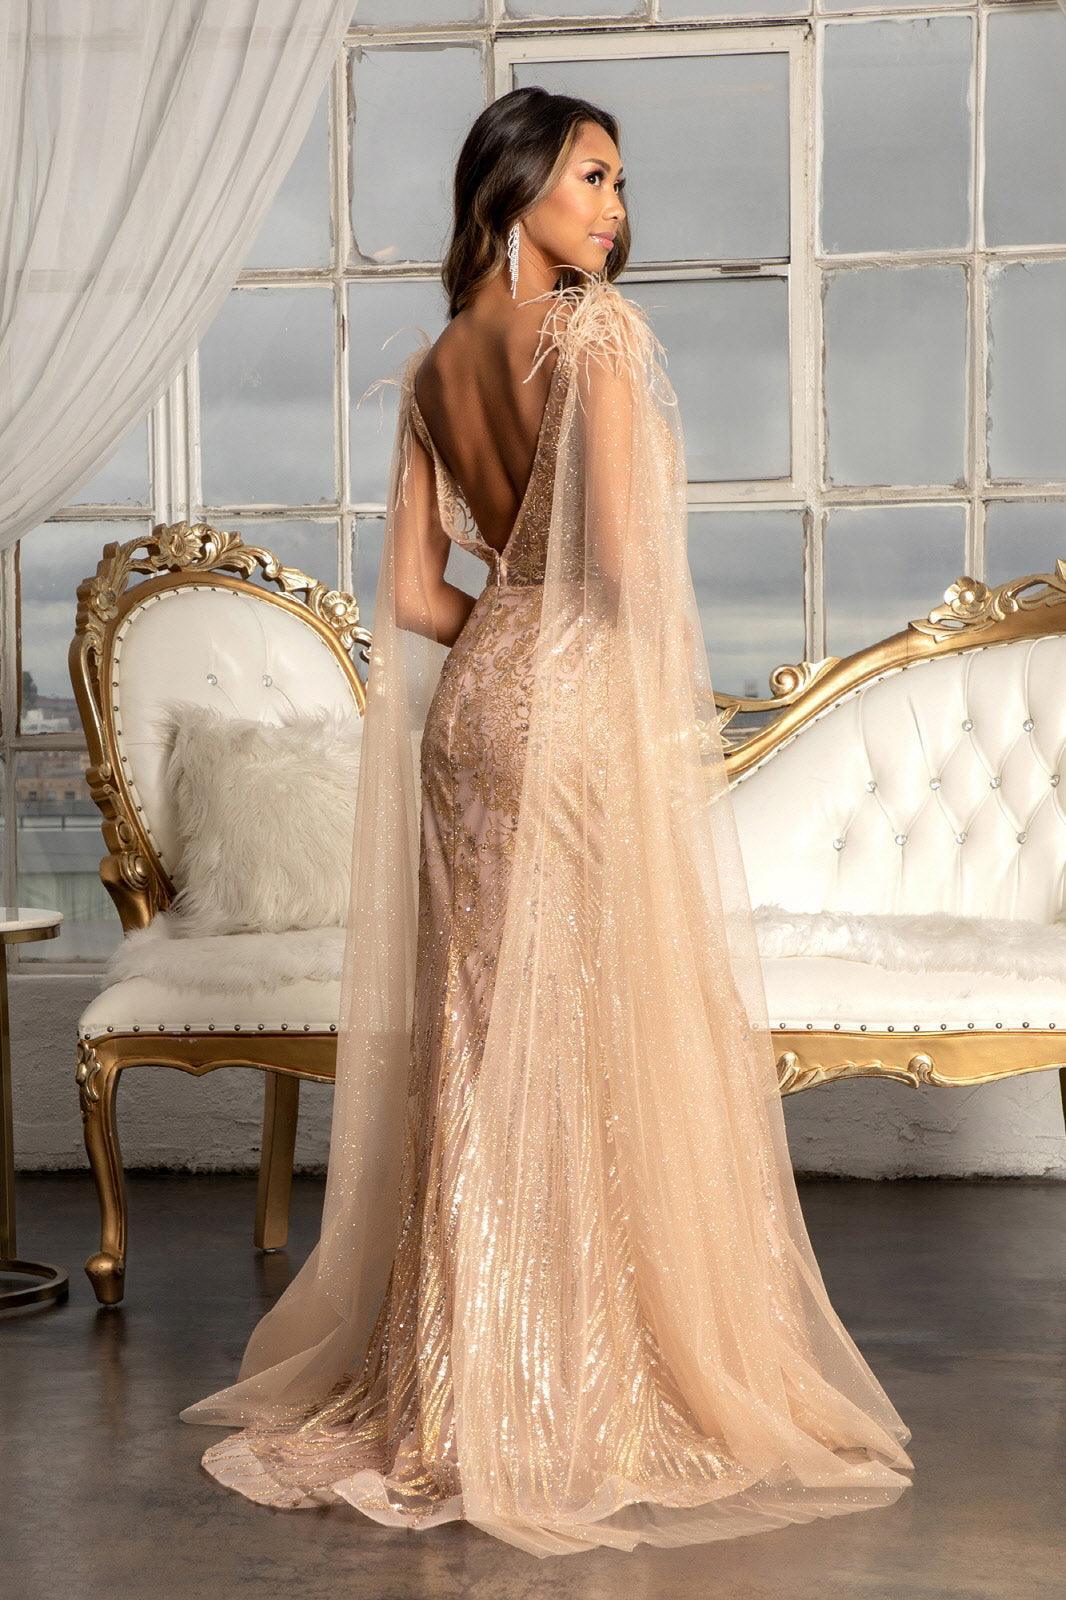 Long Formal Mermaid Prom Dress Sale - The Dress Outlet